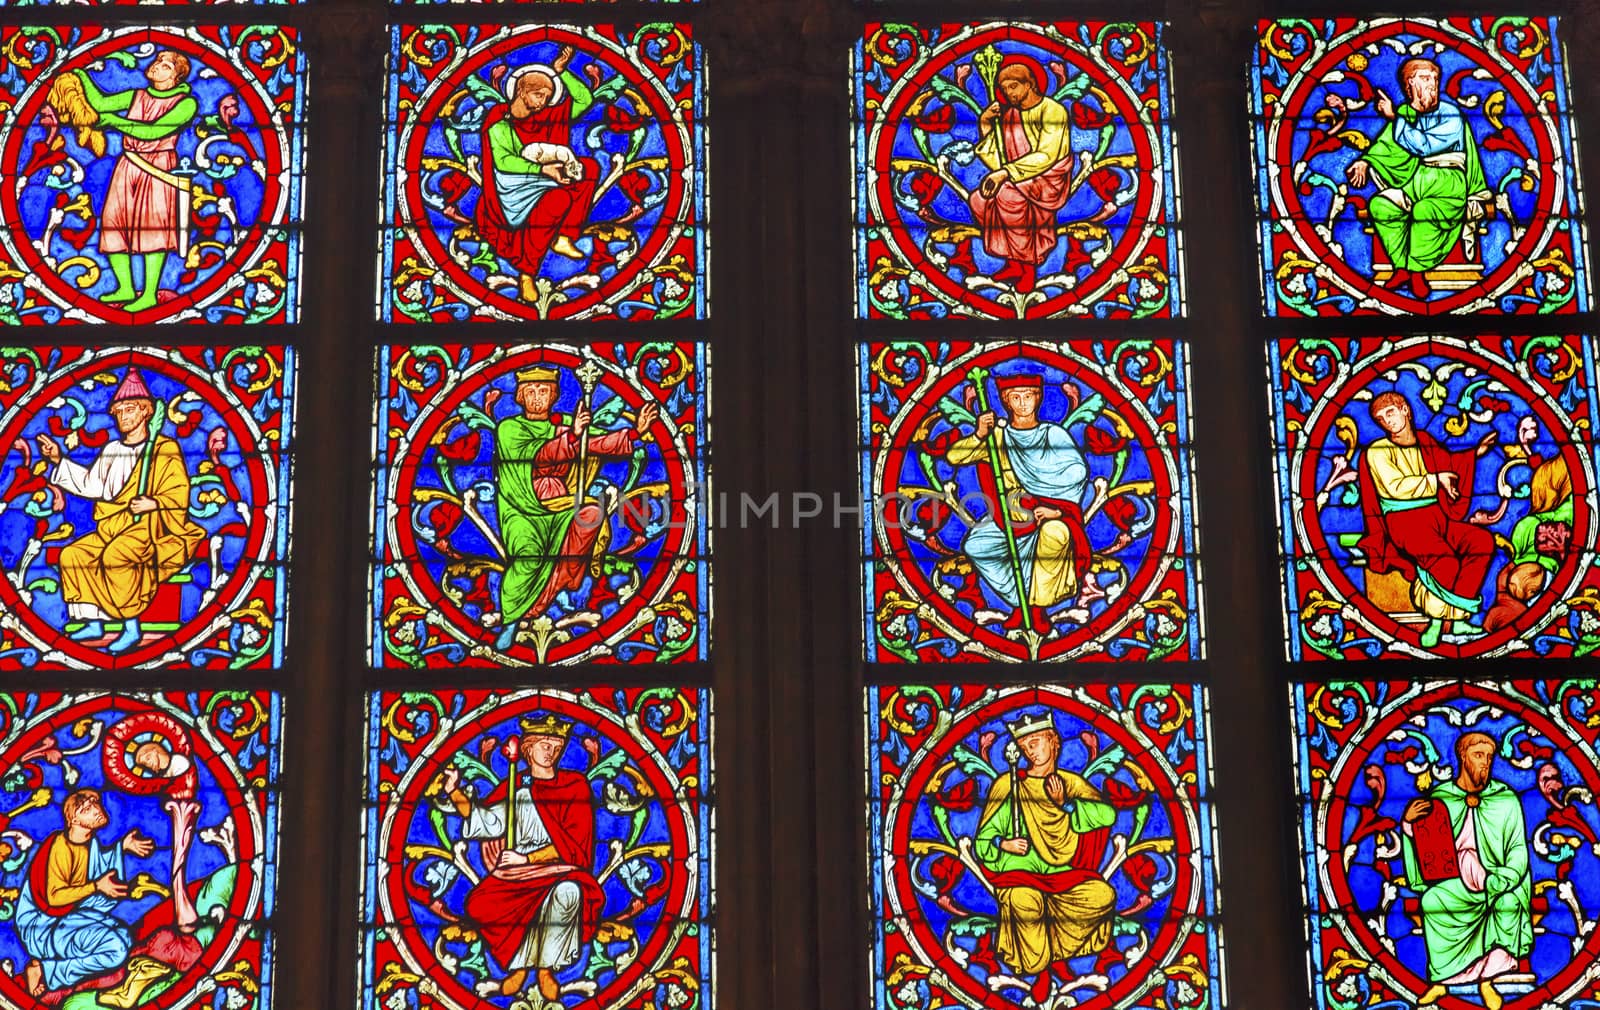 Kings Jesus Christ Stained Glass Notre Dame Cathedral Paris France.  Notre Dame was built between 1163 and 1250AD.  